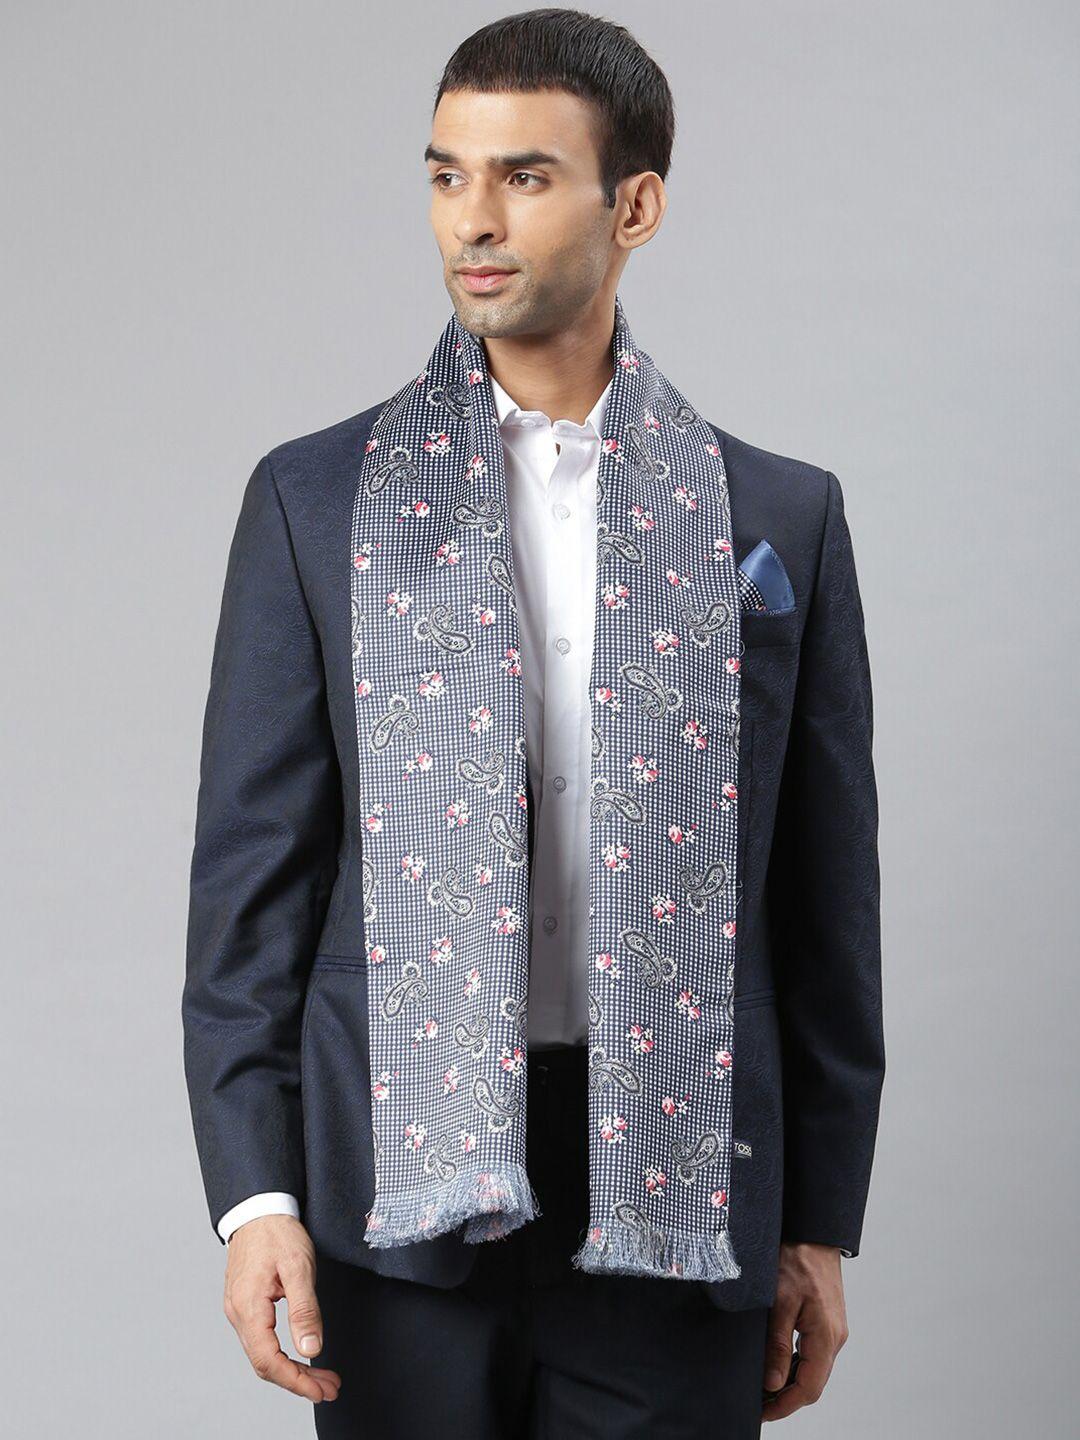 tossido men blue & white paisley printed stole with pocket square